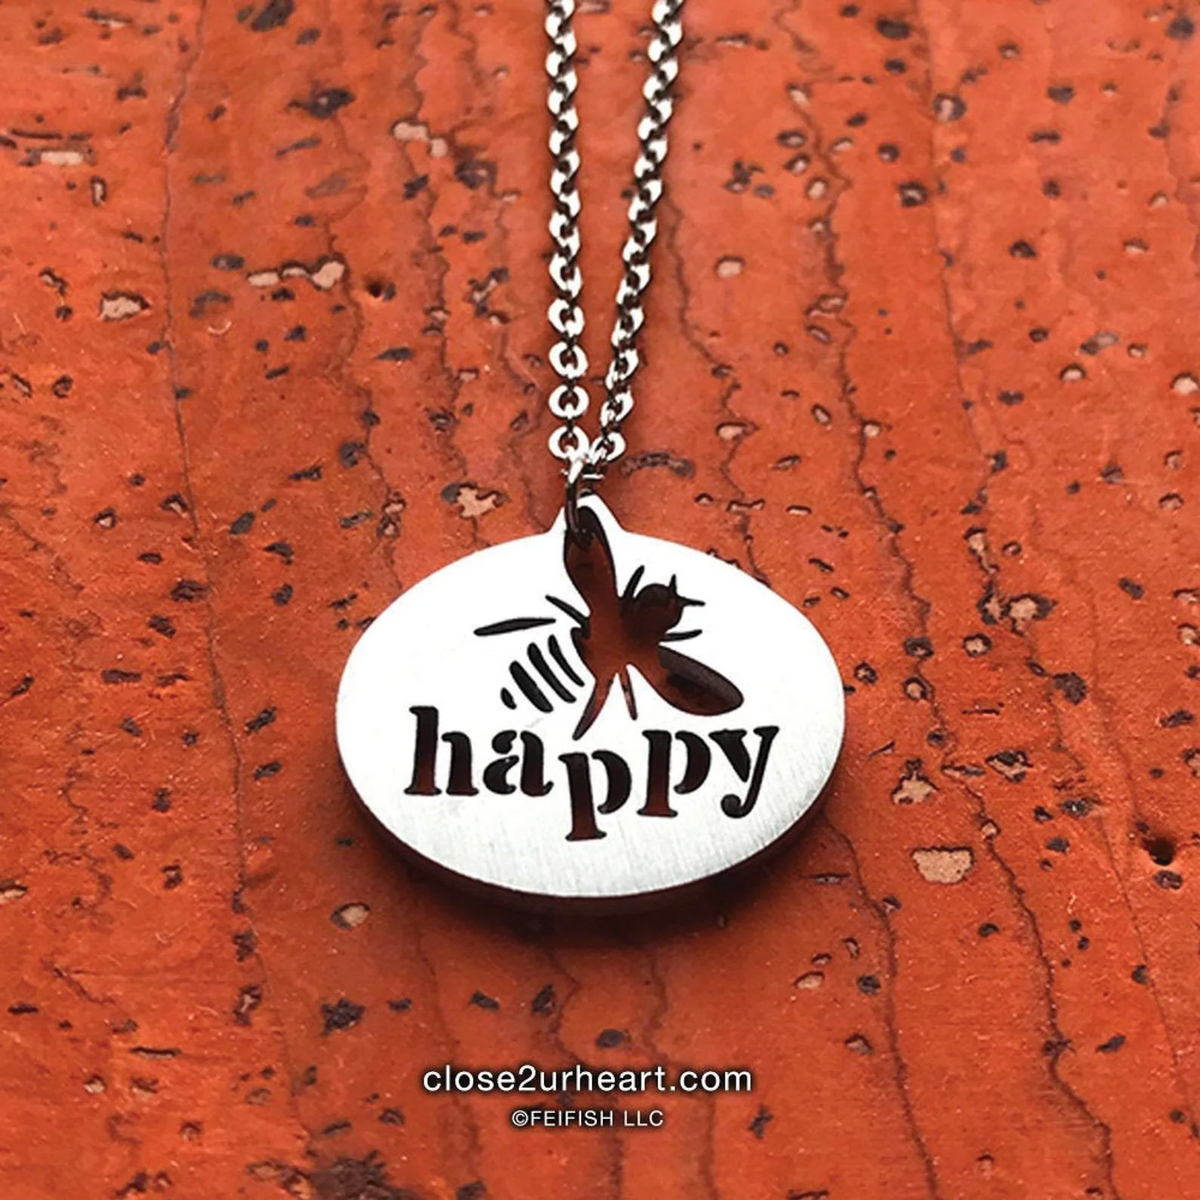 Bee Happy Necklace - Heart of the Home PA